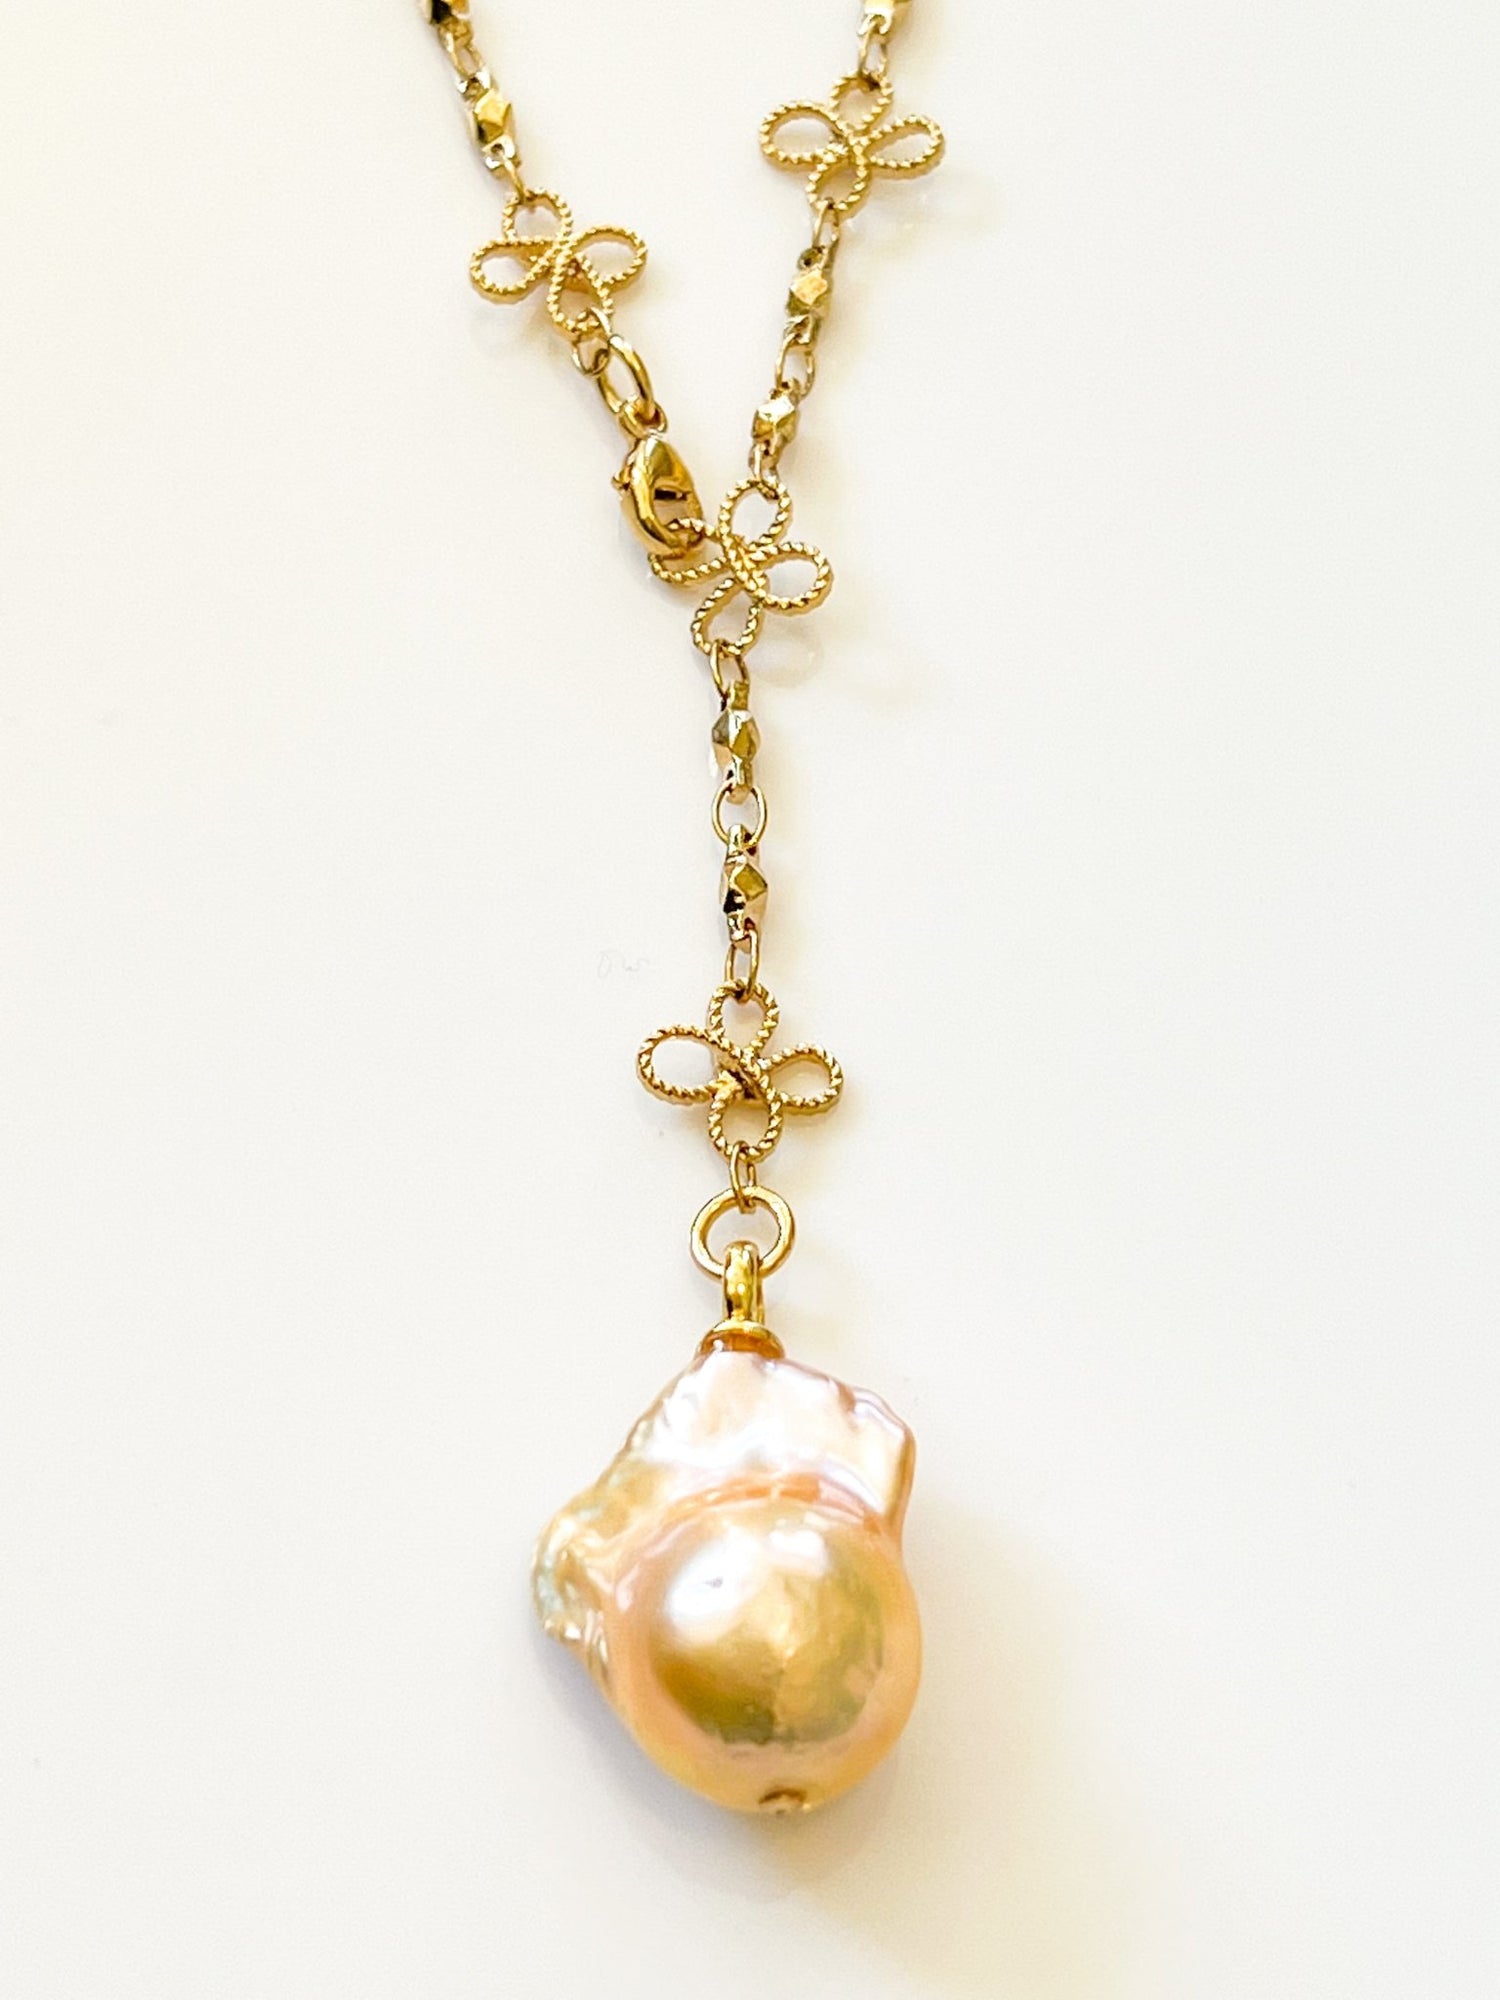 Peach Japanese Keshi Pearl Necklace on Gold Flower Chain by Sage Machado - The Sage Lifestyle